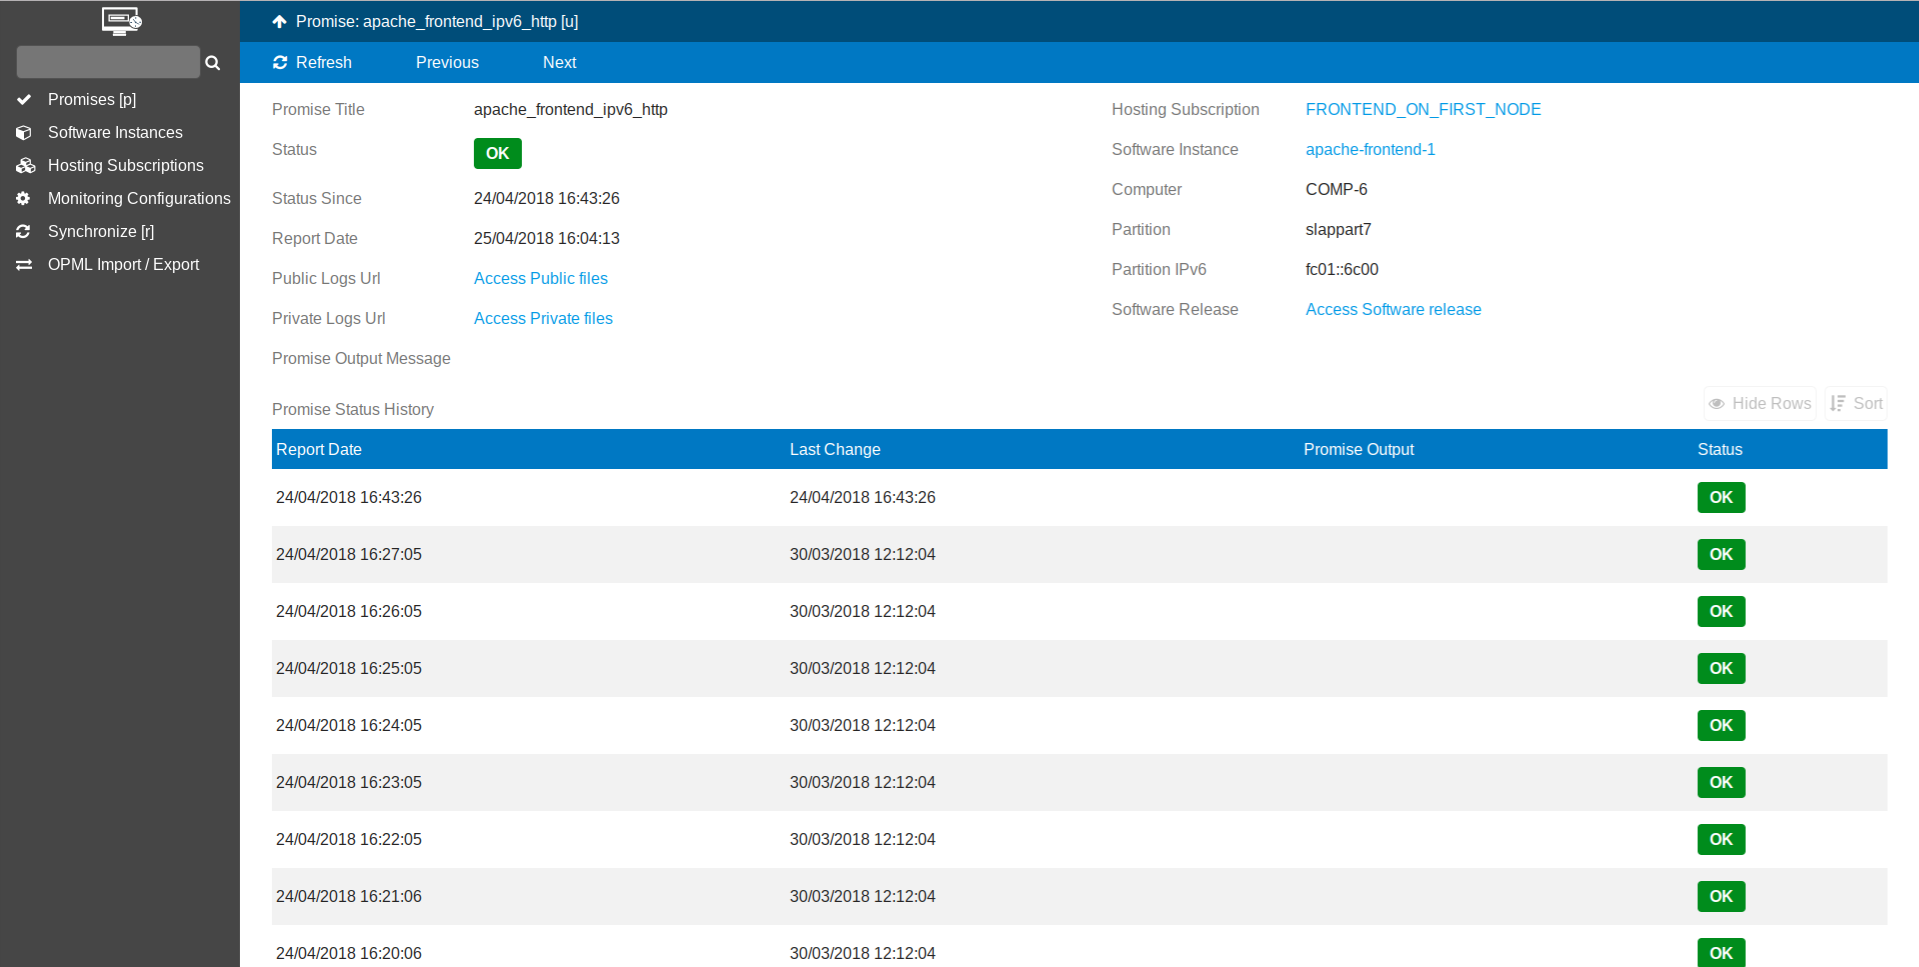 Monitor Interface - Software Instance Promise History